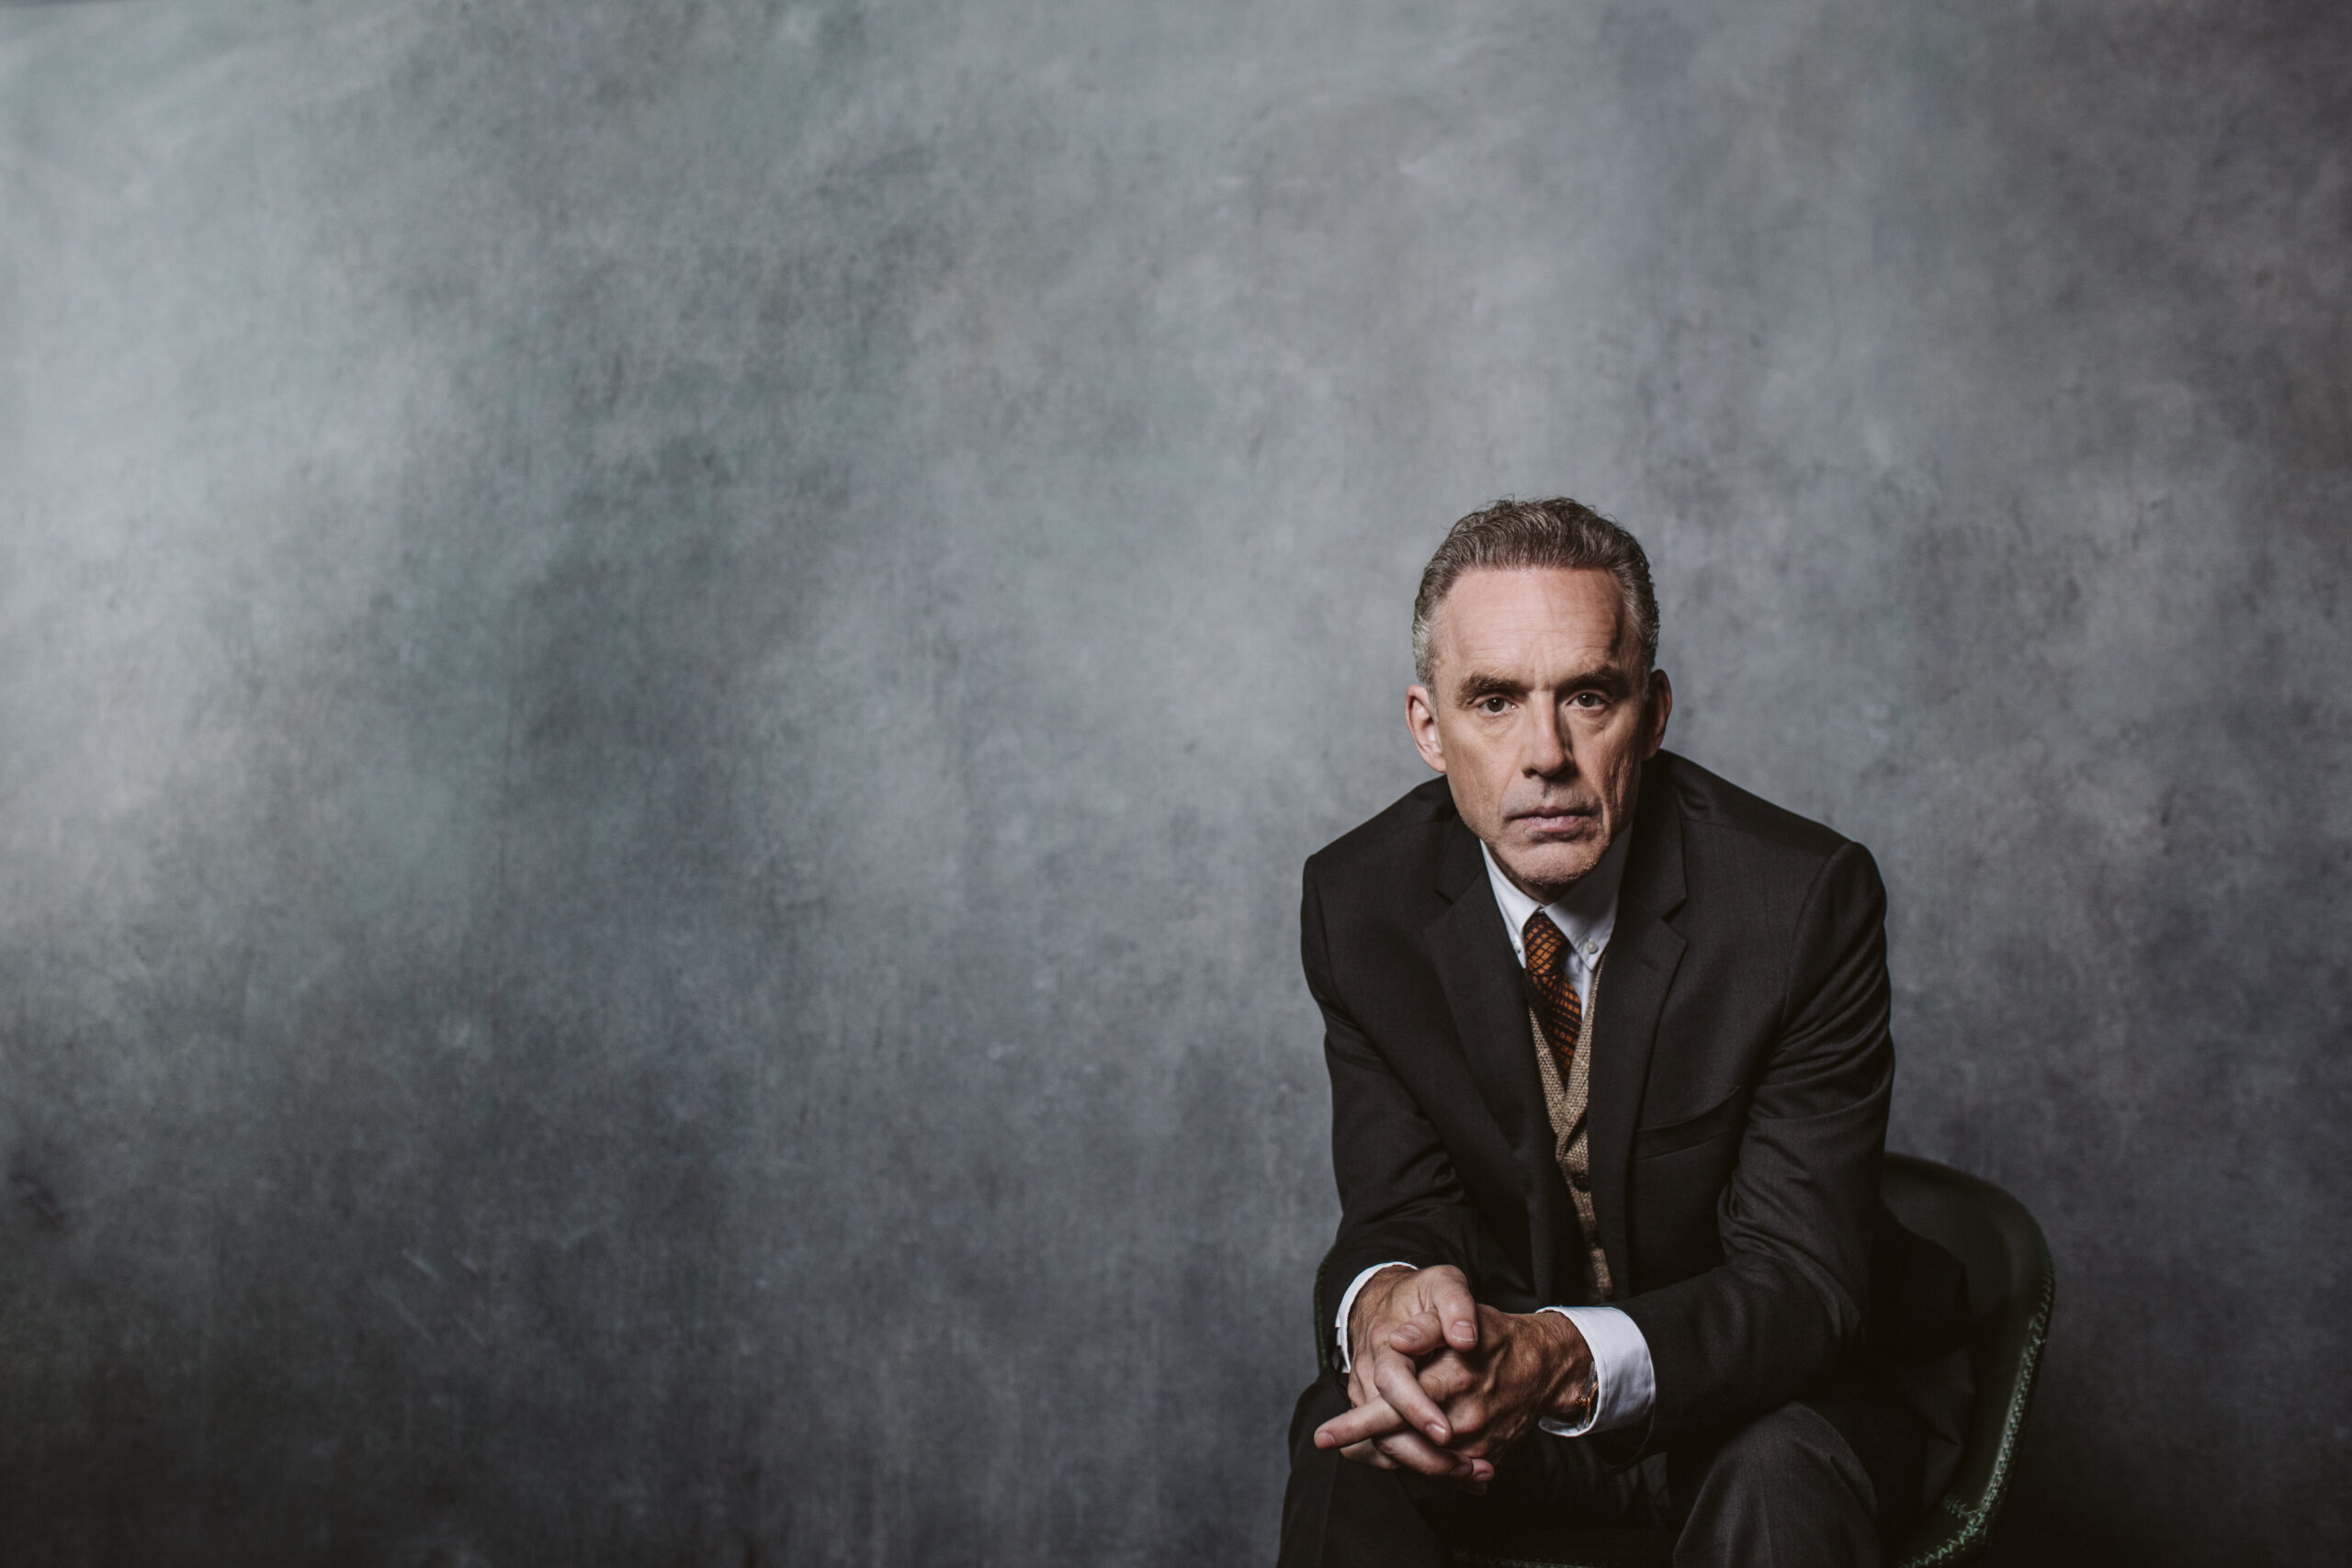 Courtesy 101: Dr. Jordan Peterson goes back to class